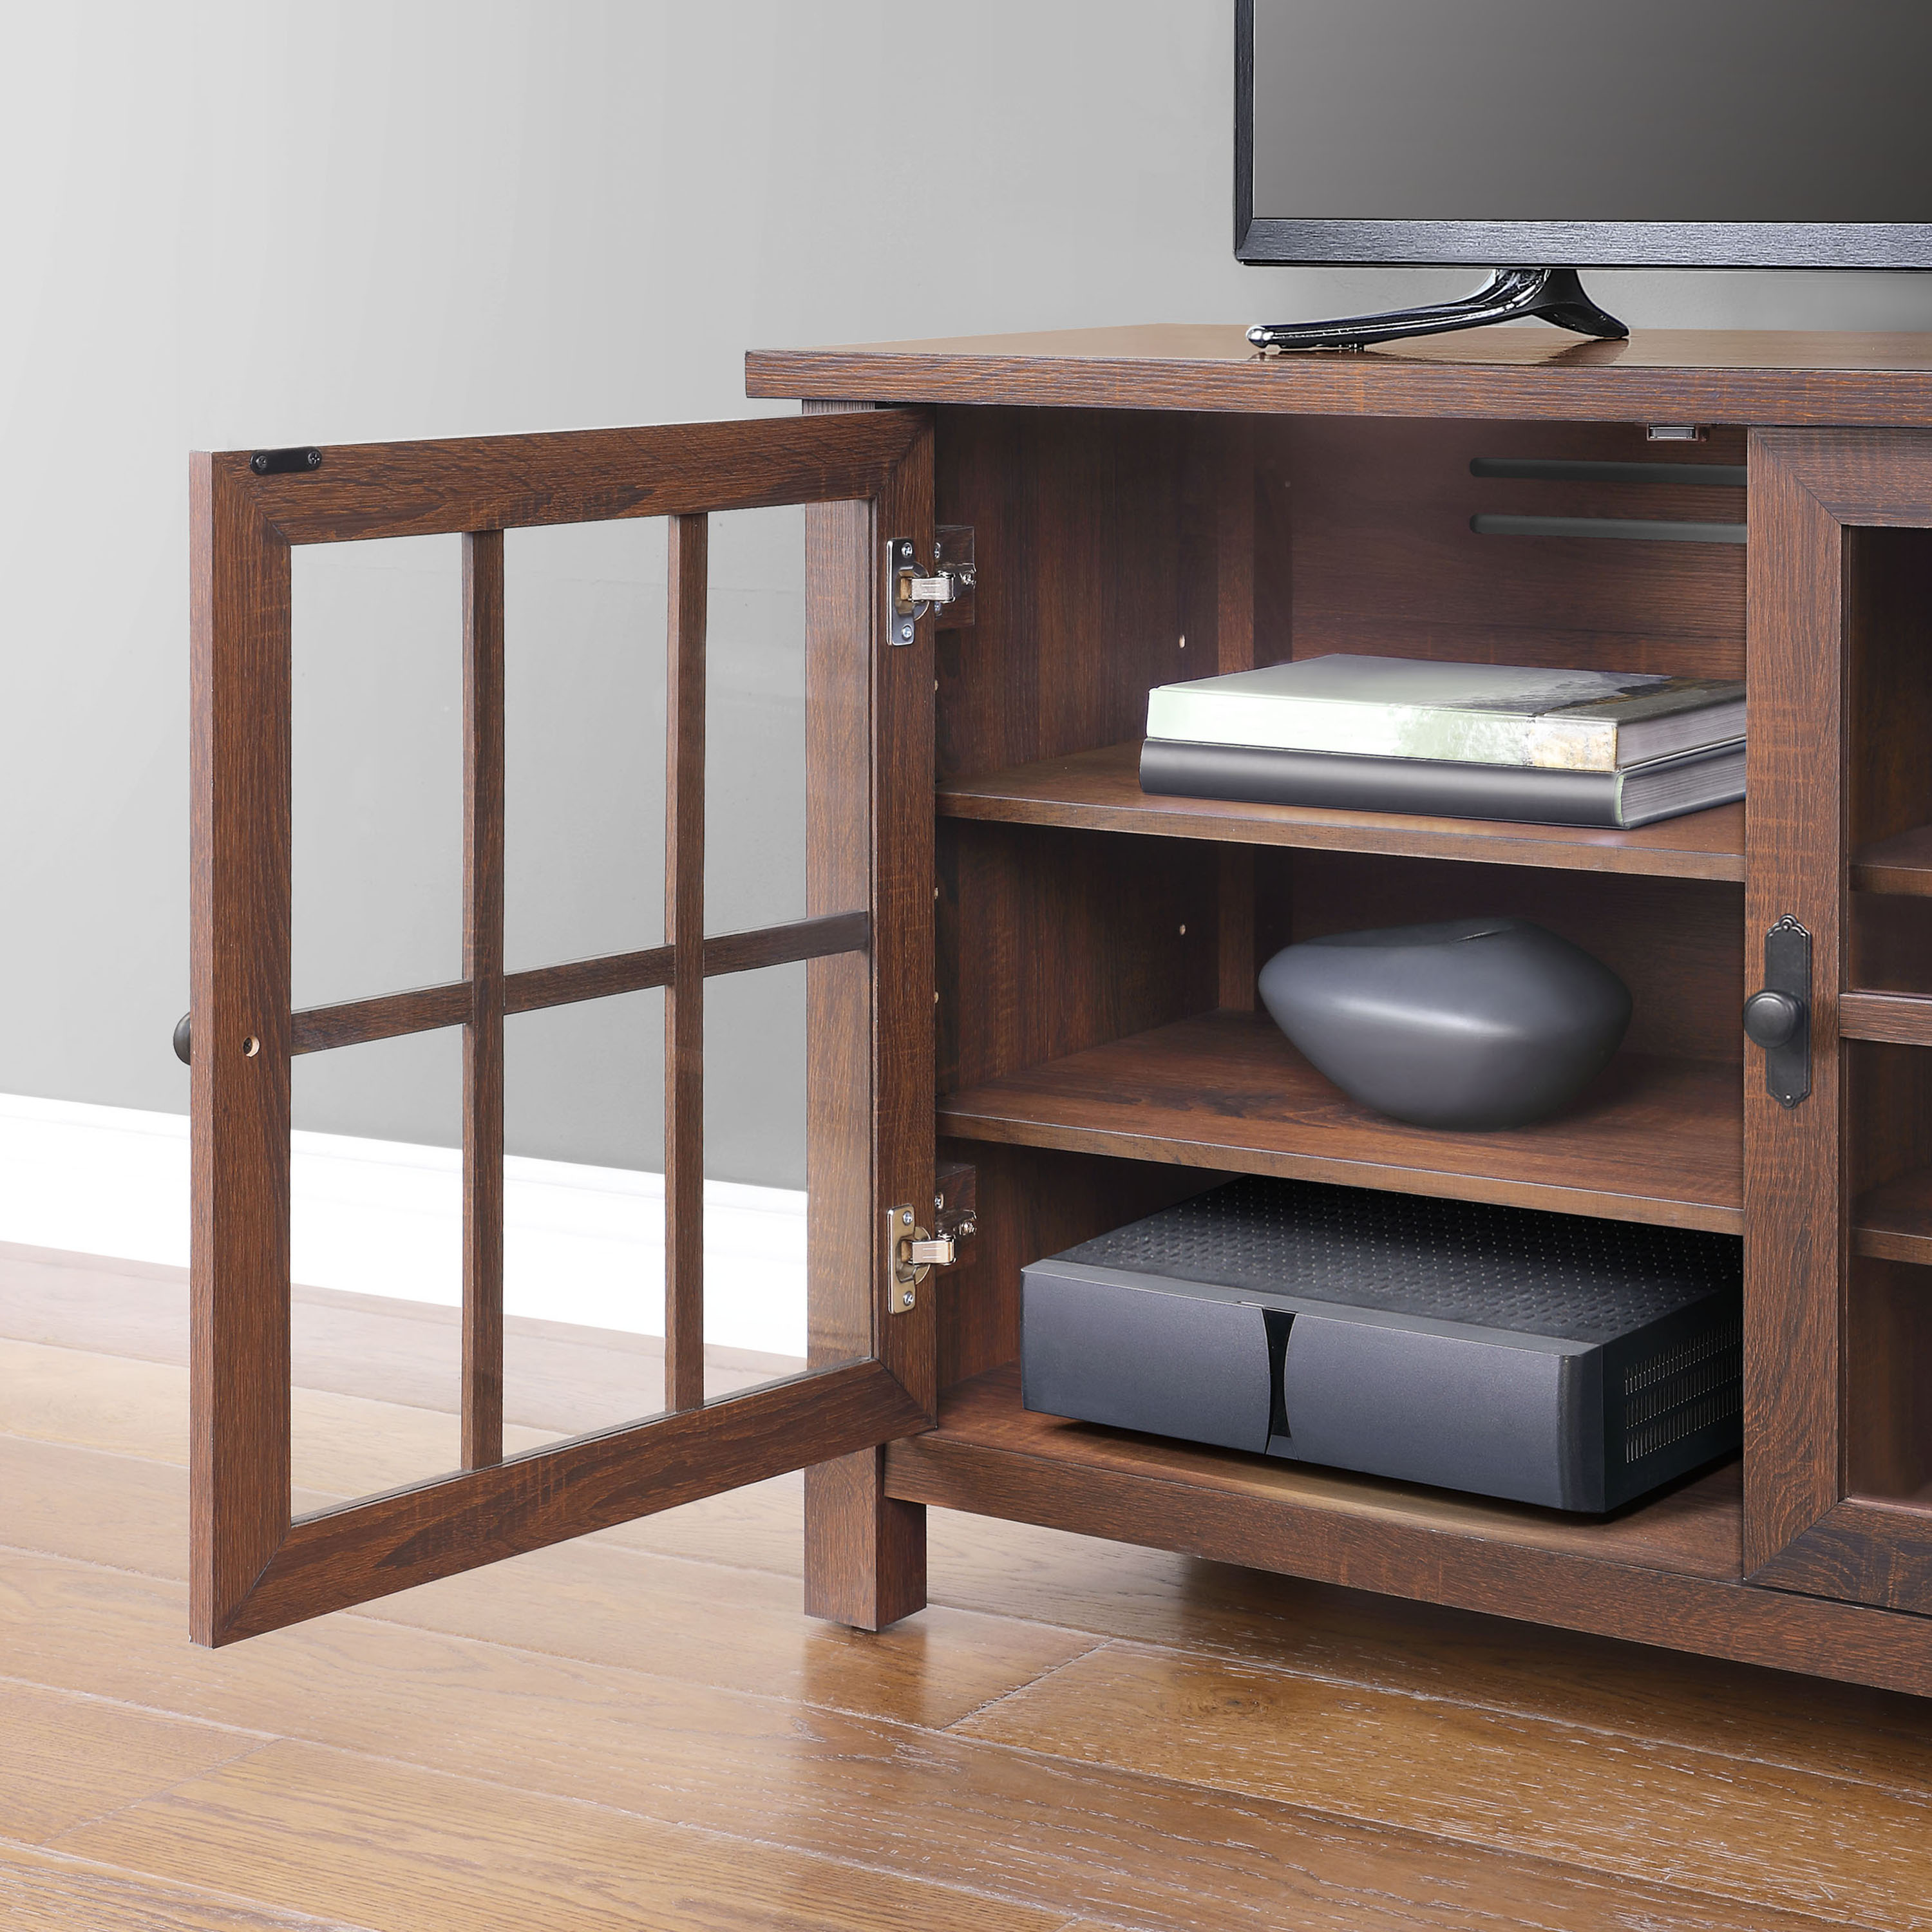 Better Homes & Gardens Oxford Square TV Stand for TVs up to 55", Dark Brown - image 5 of 12